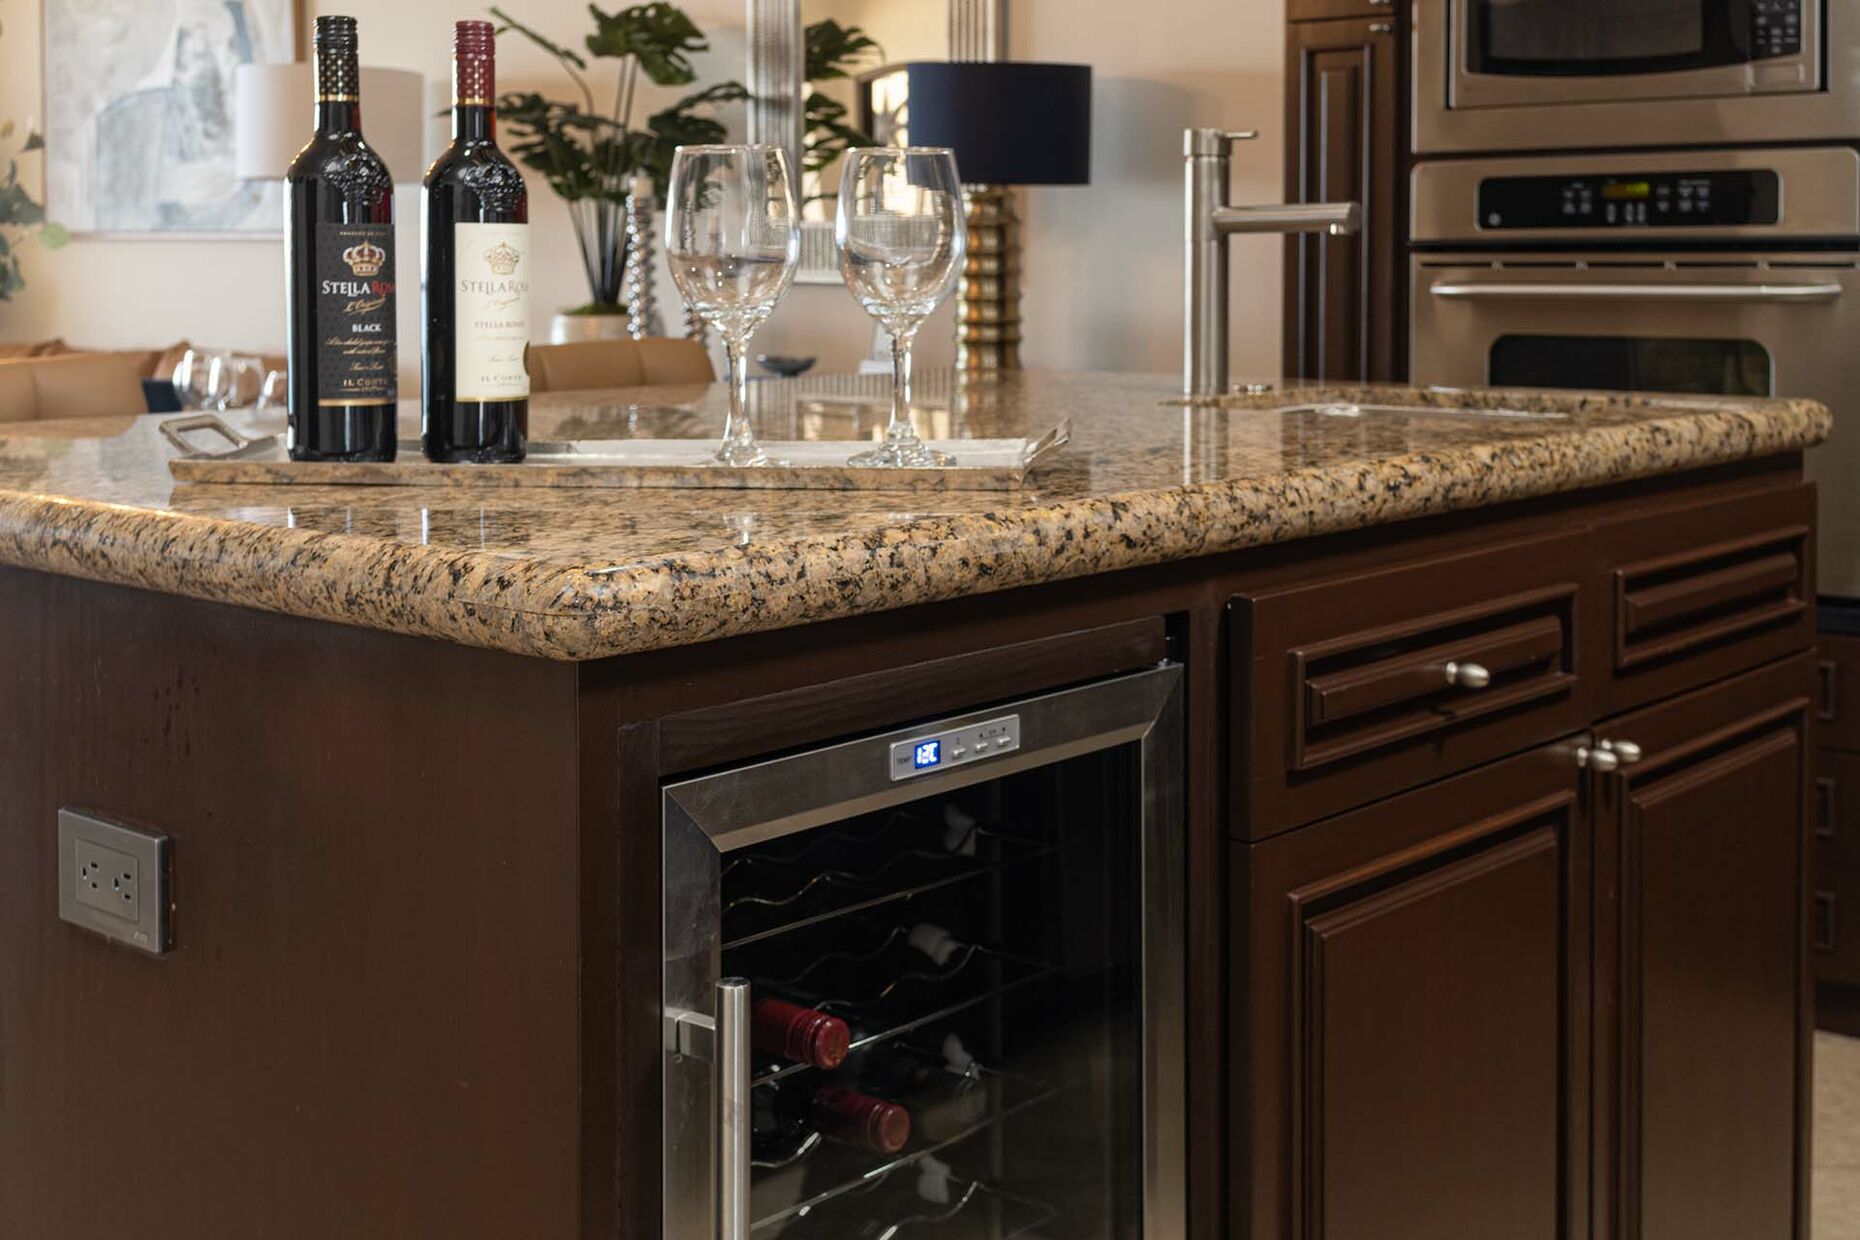 There is a wine refrigerator as part of the kitchen island.